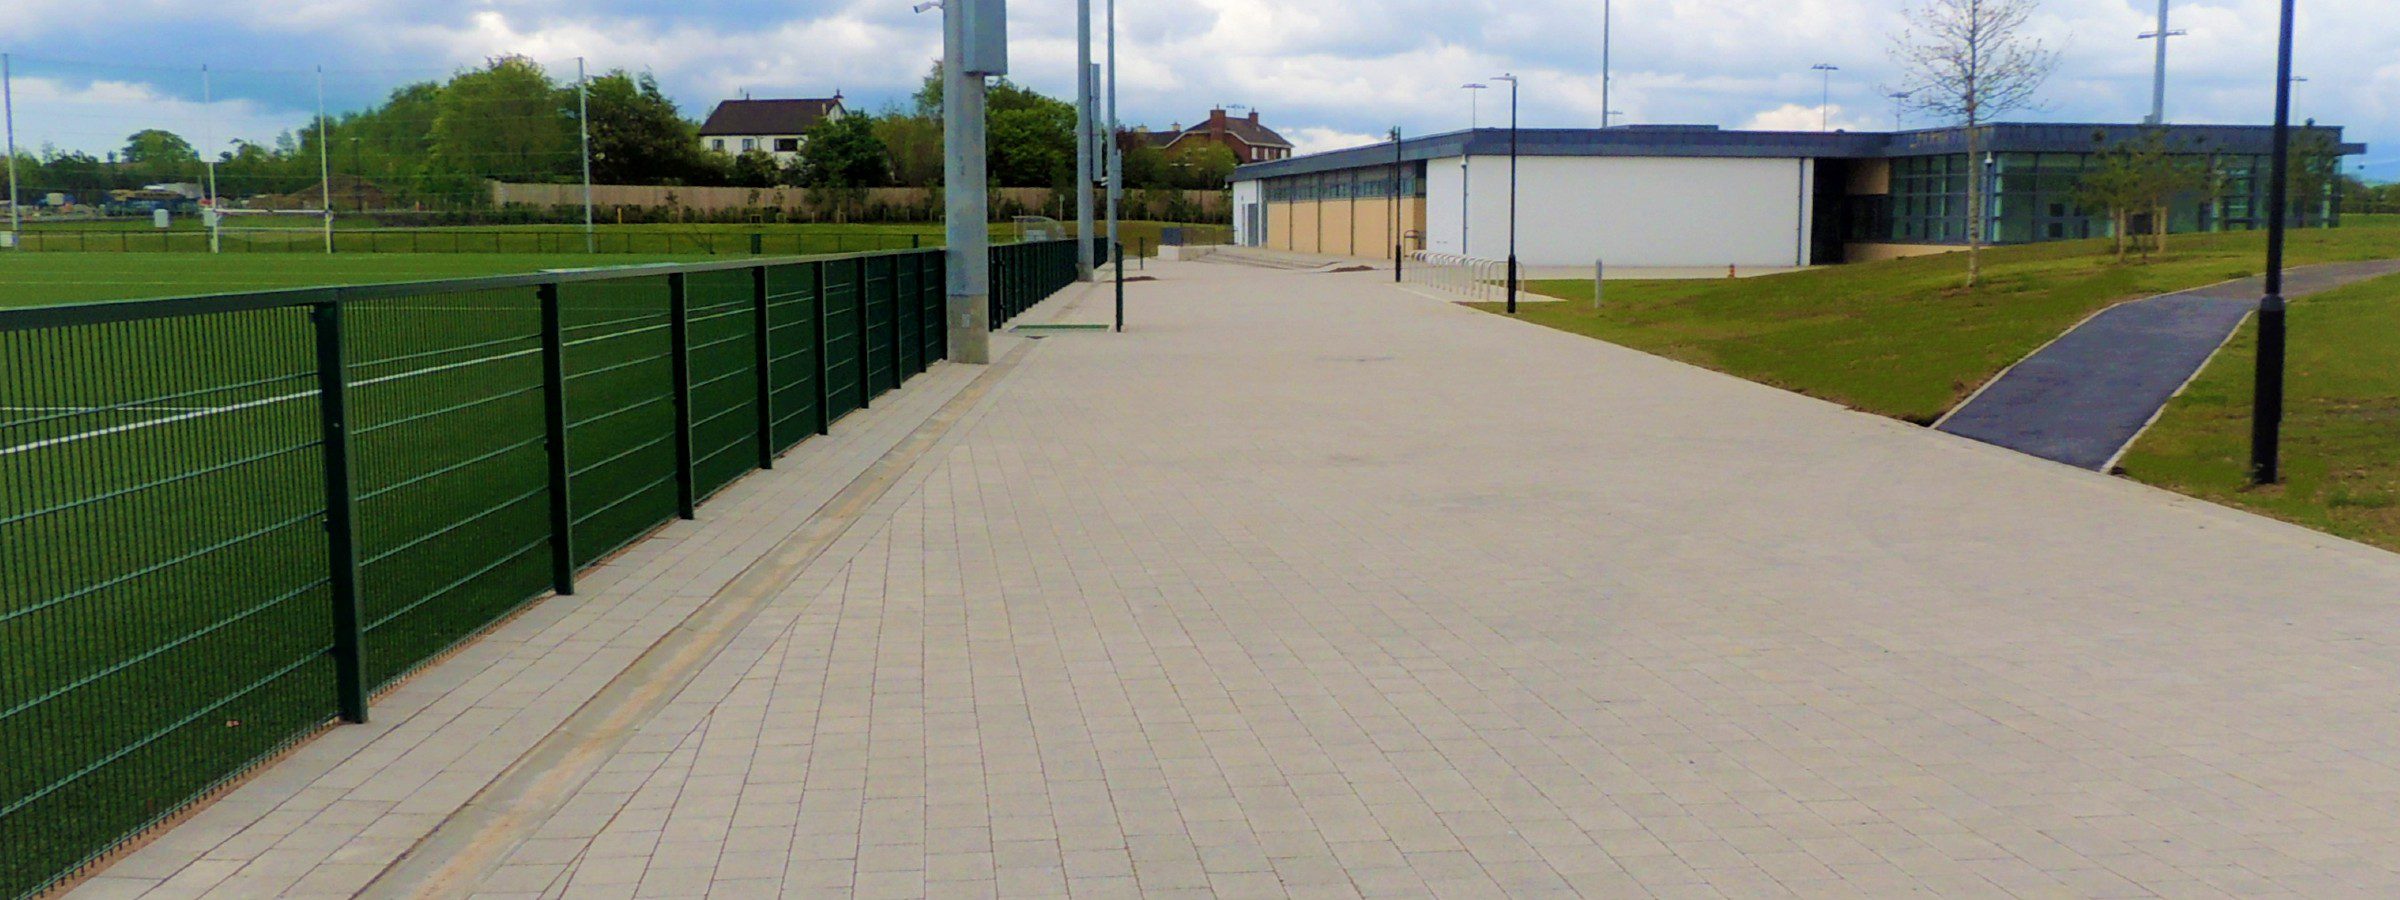 Carlow Sports Campus  -  Paving and Walling